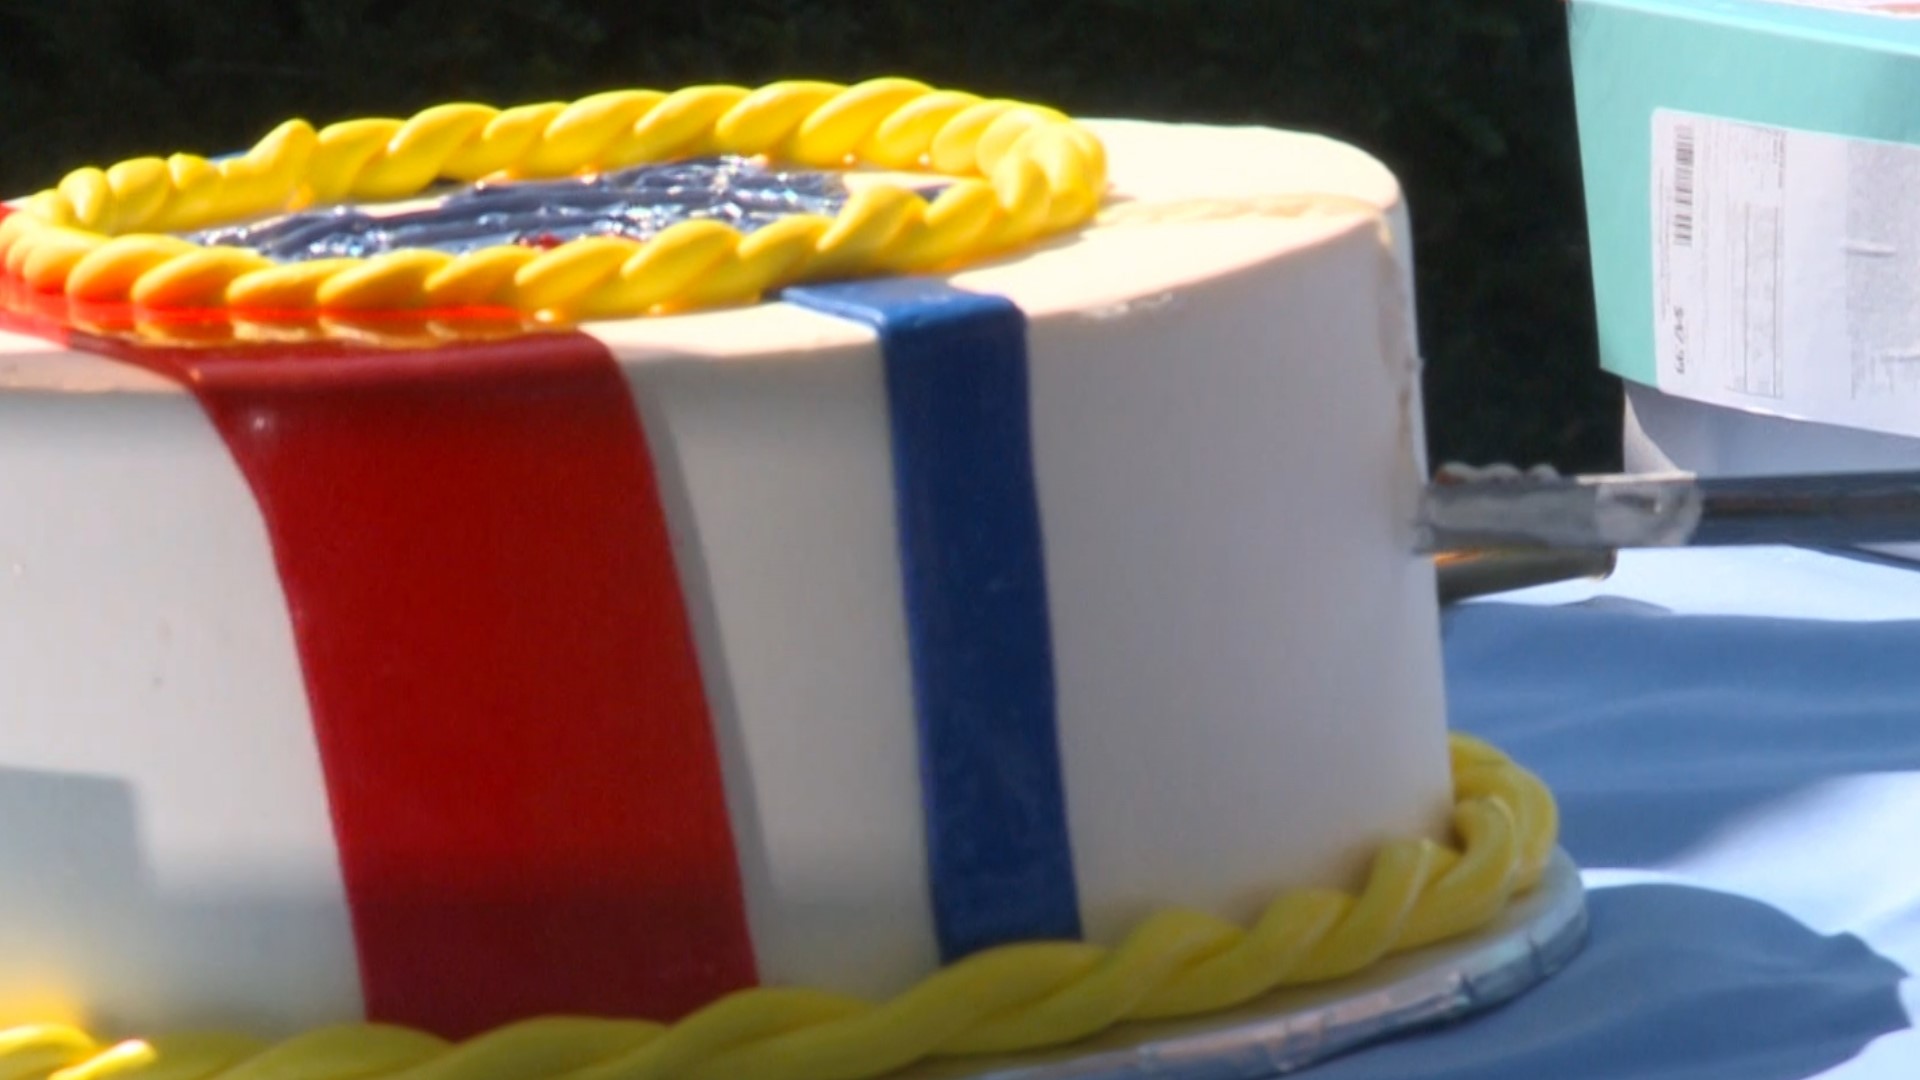 The military branch celebrated its 232nd birthday at the U.S. Coast Guard Academy in New London.